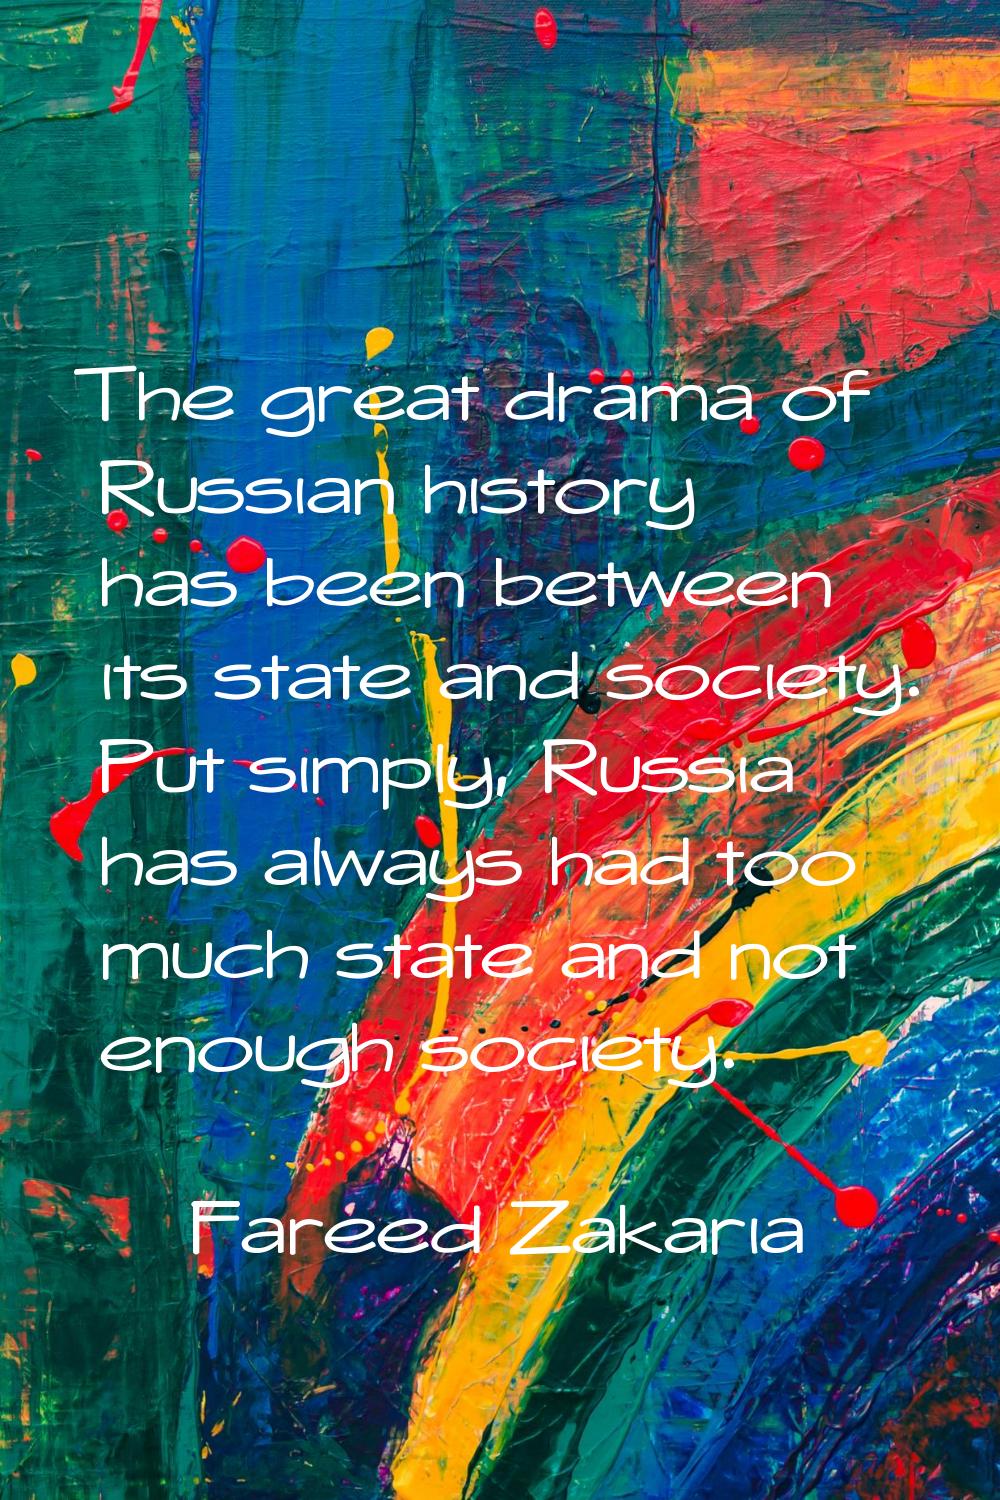 The great drama of Russian history has been between its state and society. Put simply, Russia has a